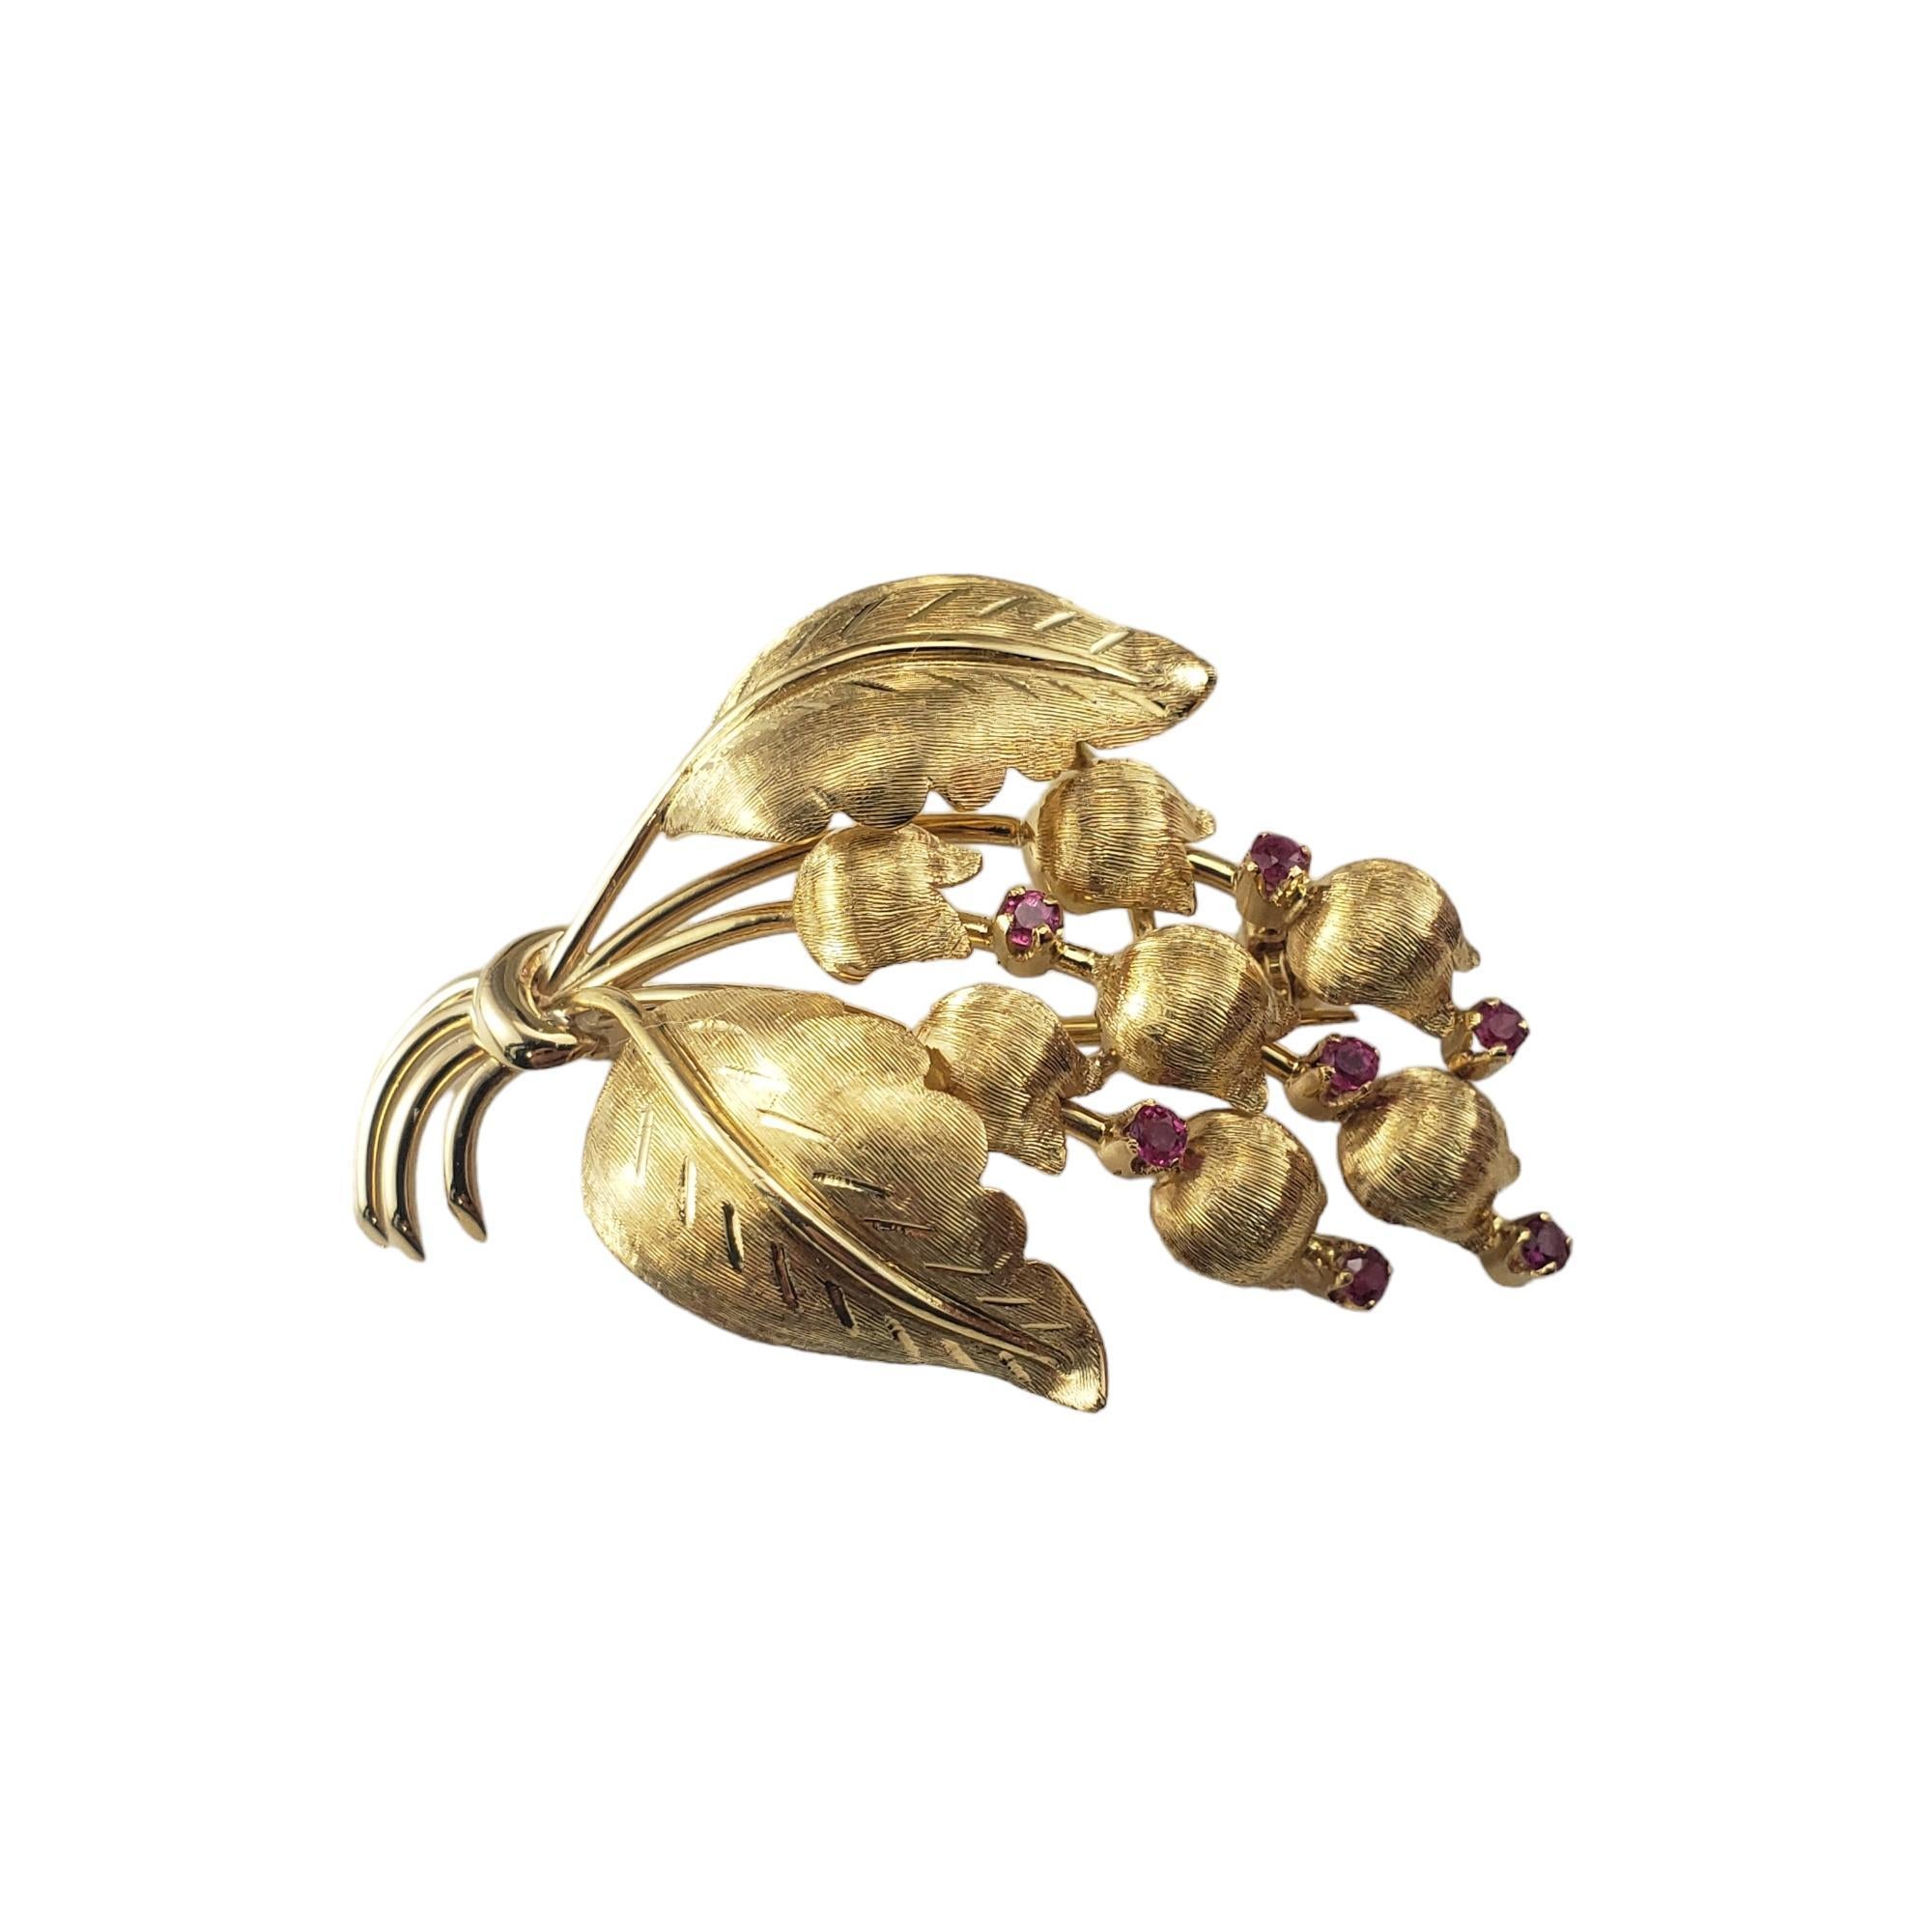 Vintage Tiffany & Co. 18K Yellow Gold and Ruby Lily of the Valley Brooch-

This exquisite Tiffany & Co. brooch features seven round faceted rubies set in beautifully detailed 18K yellow gold.

Size: 1.7 inches x 1.1 inches

Hallmark:  Tiffany & Co.